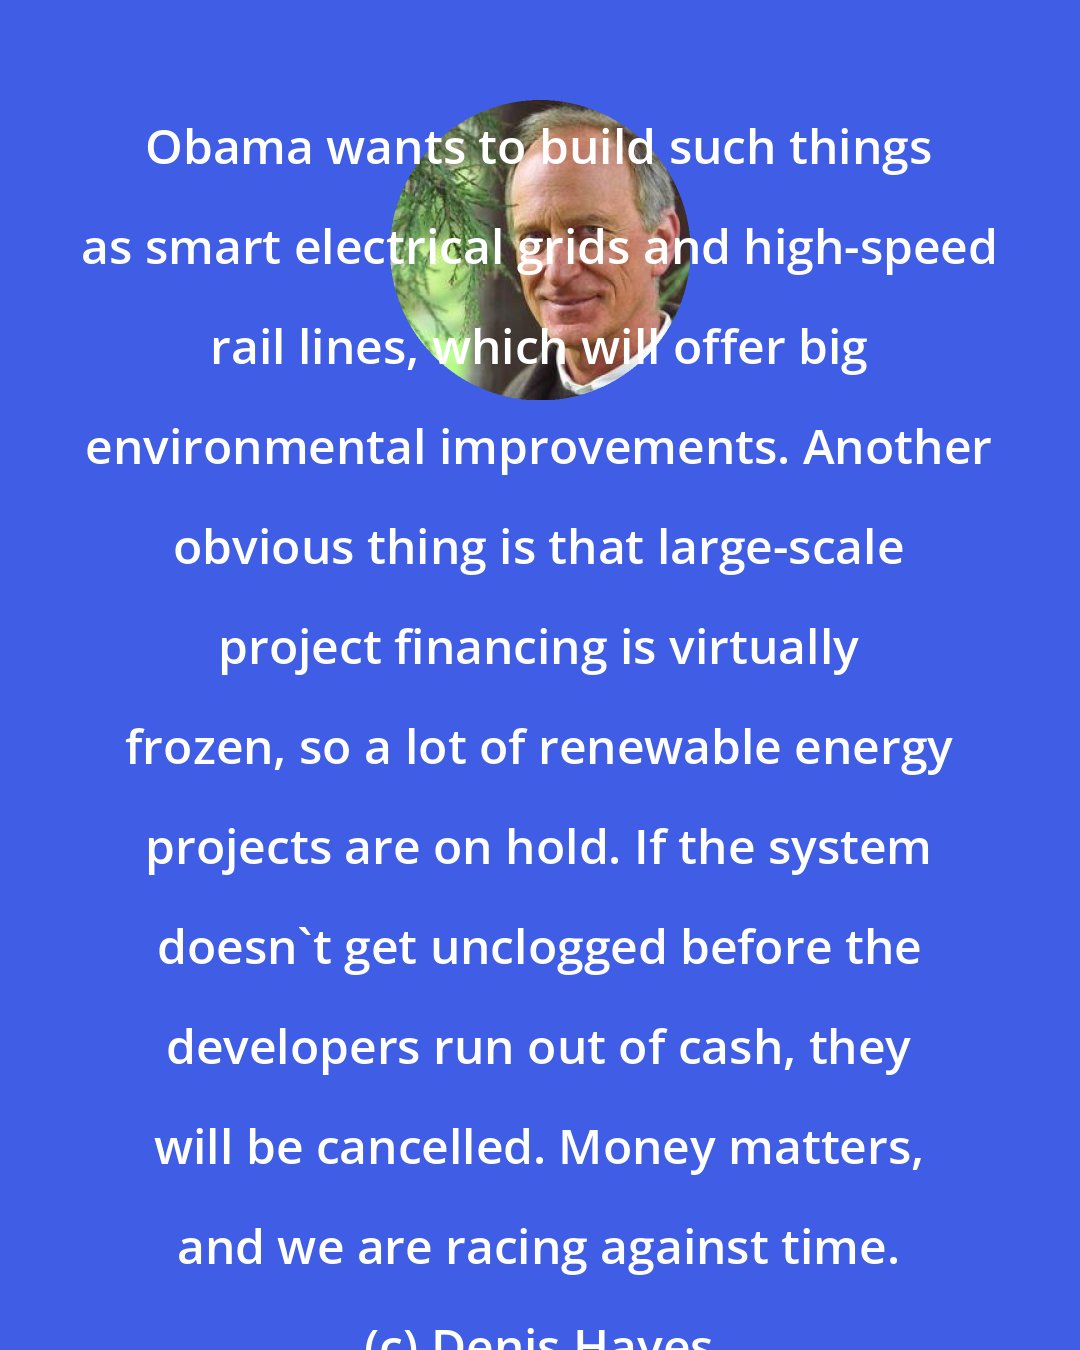 Denis Hayes: Obama wants to build such things as smart electrical grids and high-speed rail lines, which will offer big environmental improvements. Another obvious thing is that large-scale project financing is virtually frozen, so a lot of renewable energy projects are on hold. If the system doesn't get unclogged before the developers run out of cash, they will be cancelled. Money matters, and we are racing against time.